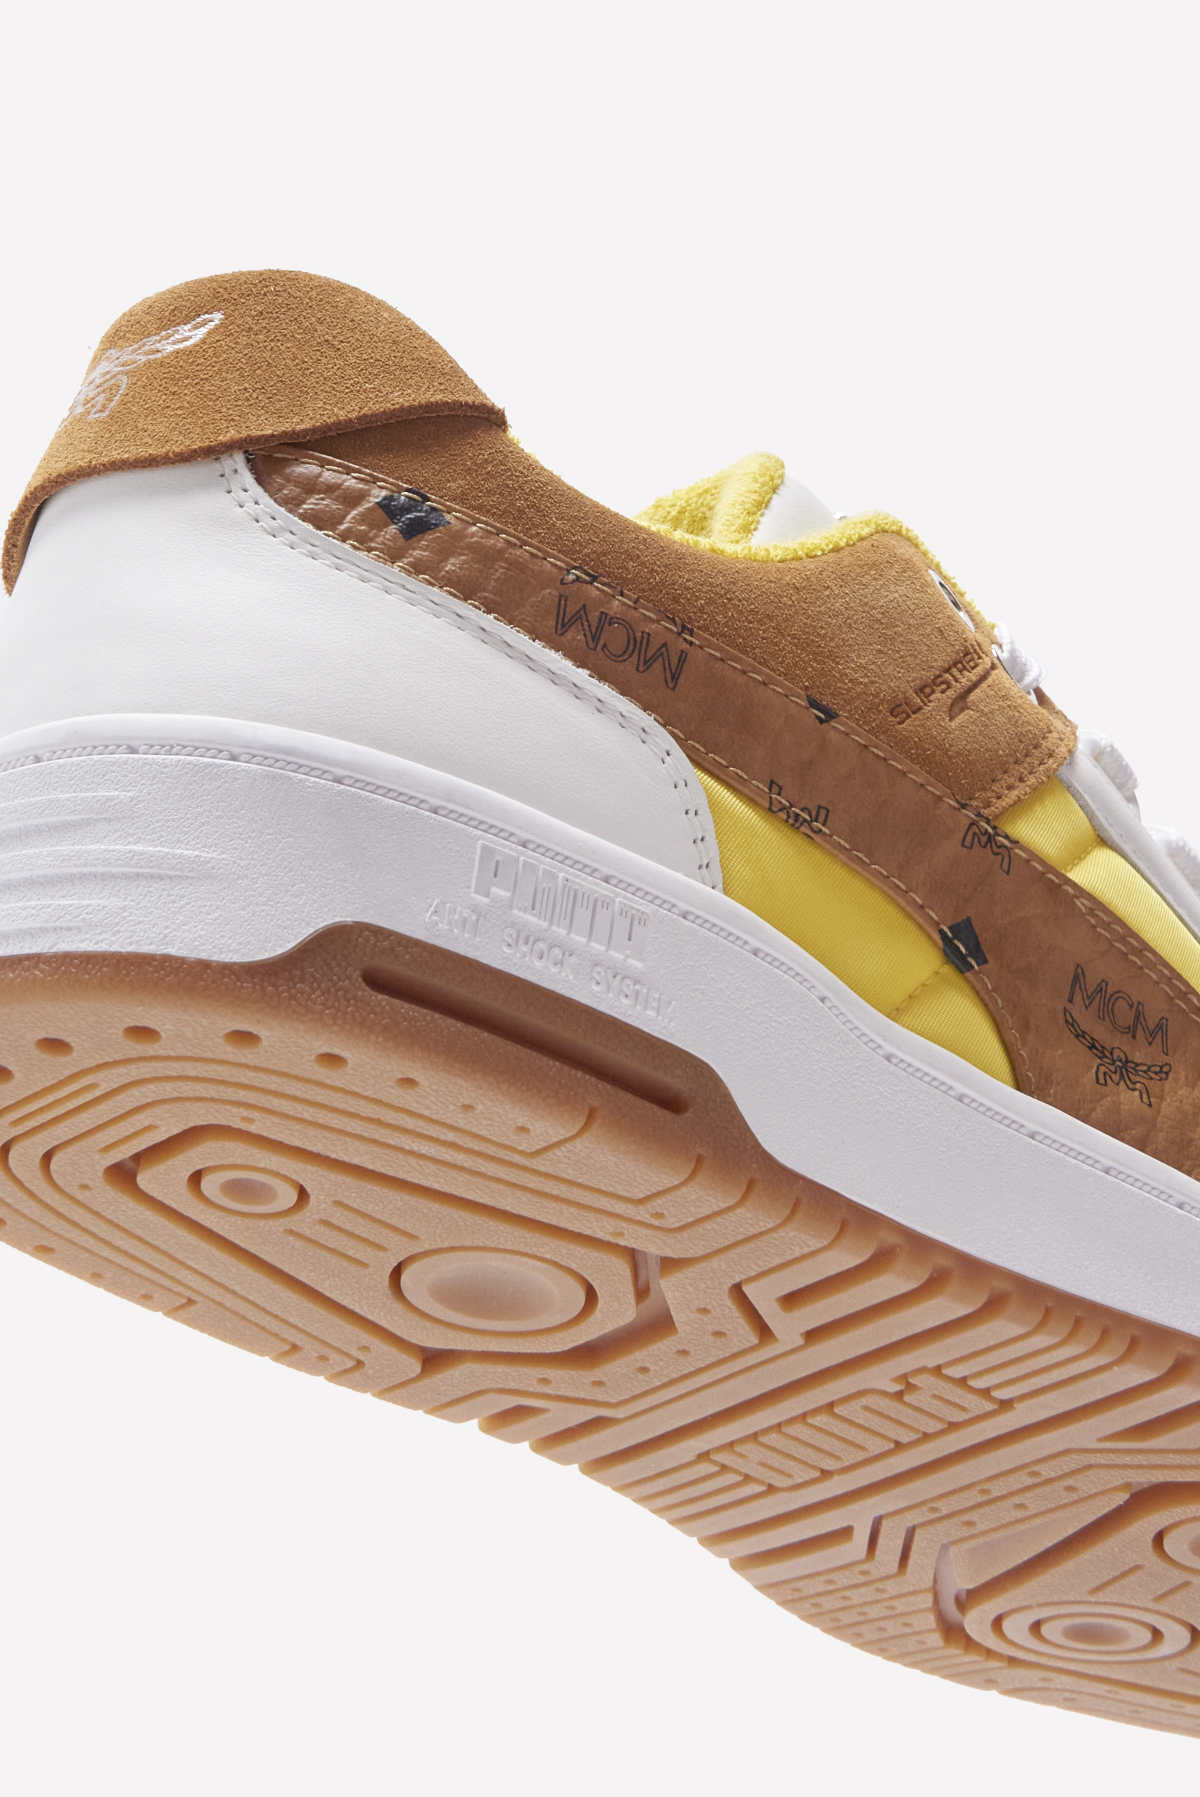 MCM And Puma Collaborate On Three Drop Limited-Edition Release